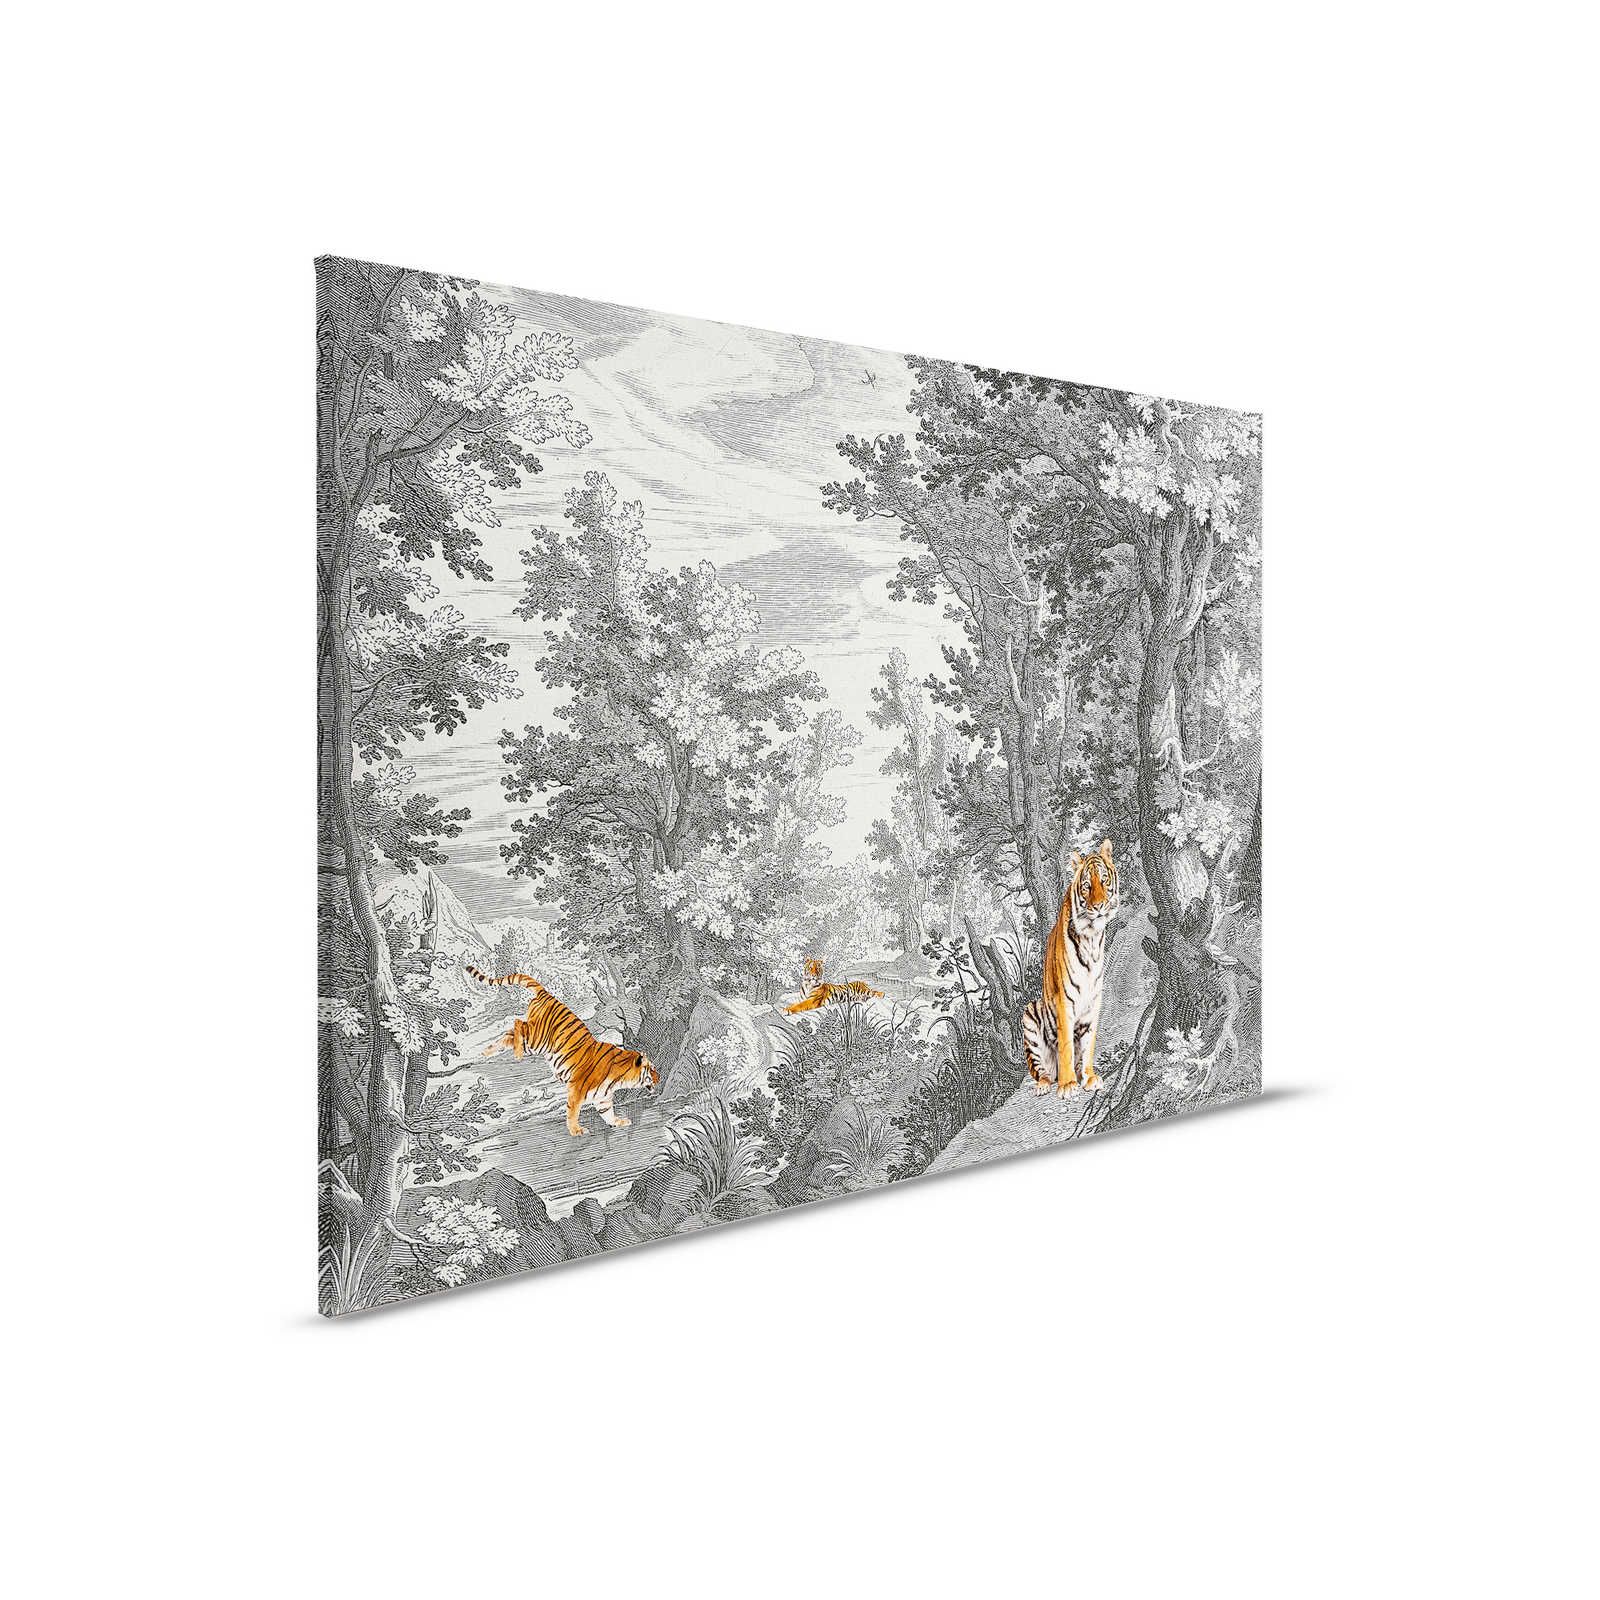 Fancy Forest 2 - Canvas painting Classic Landscape with Tiger - 0,90 m x 0,60 m
